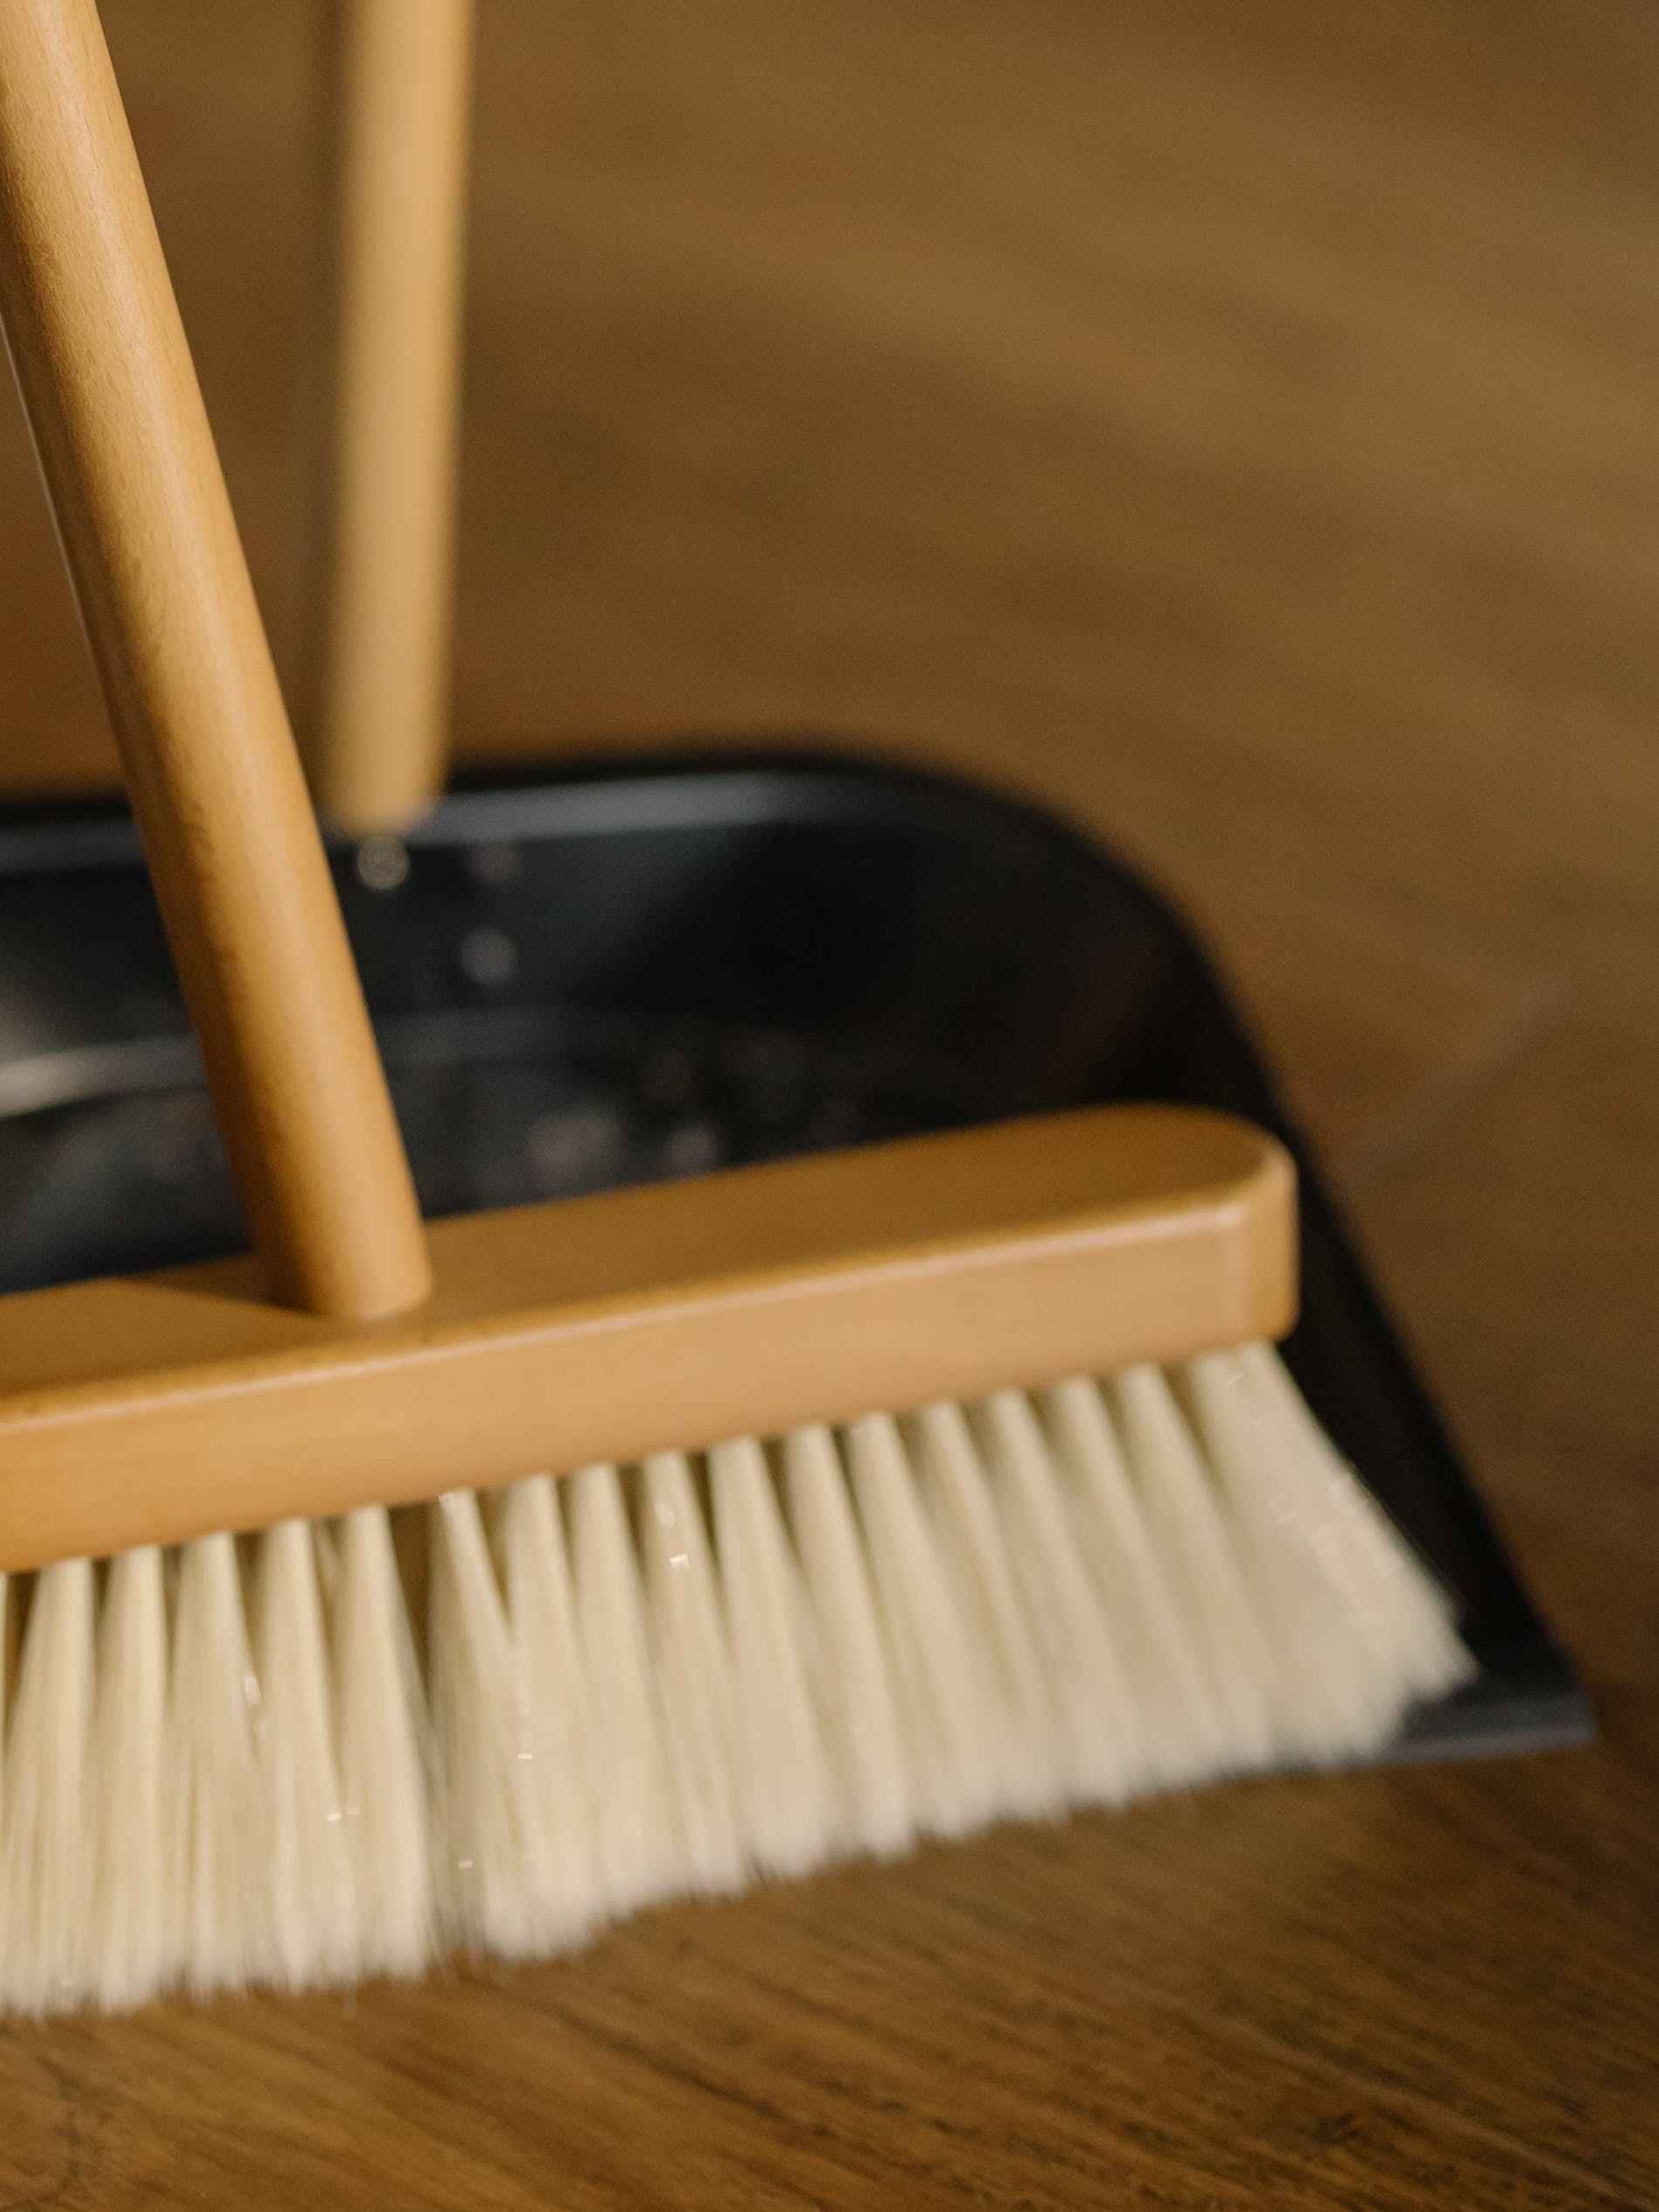 book deep cleaning services in denver